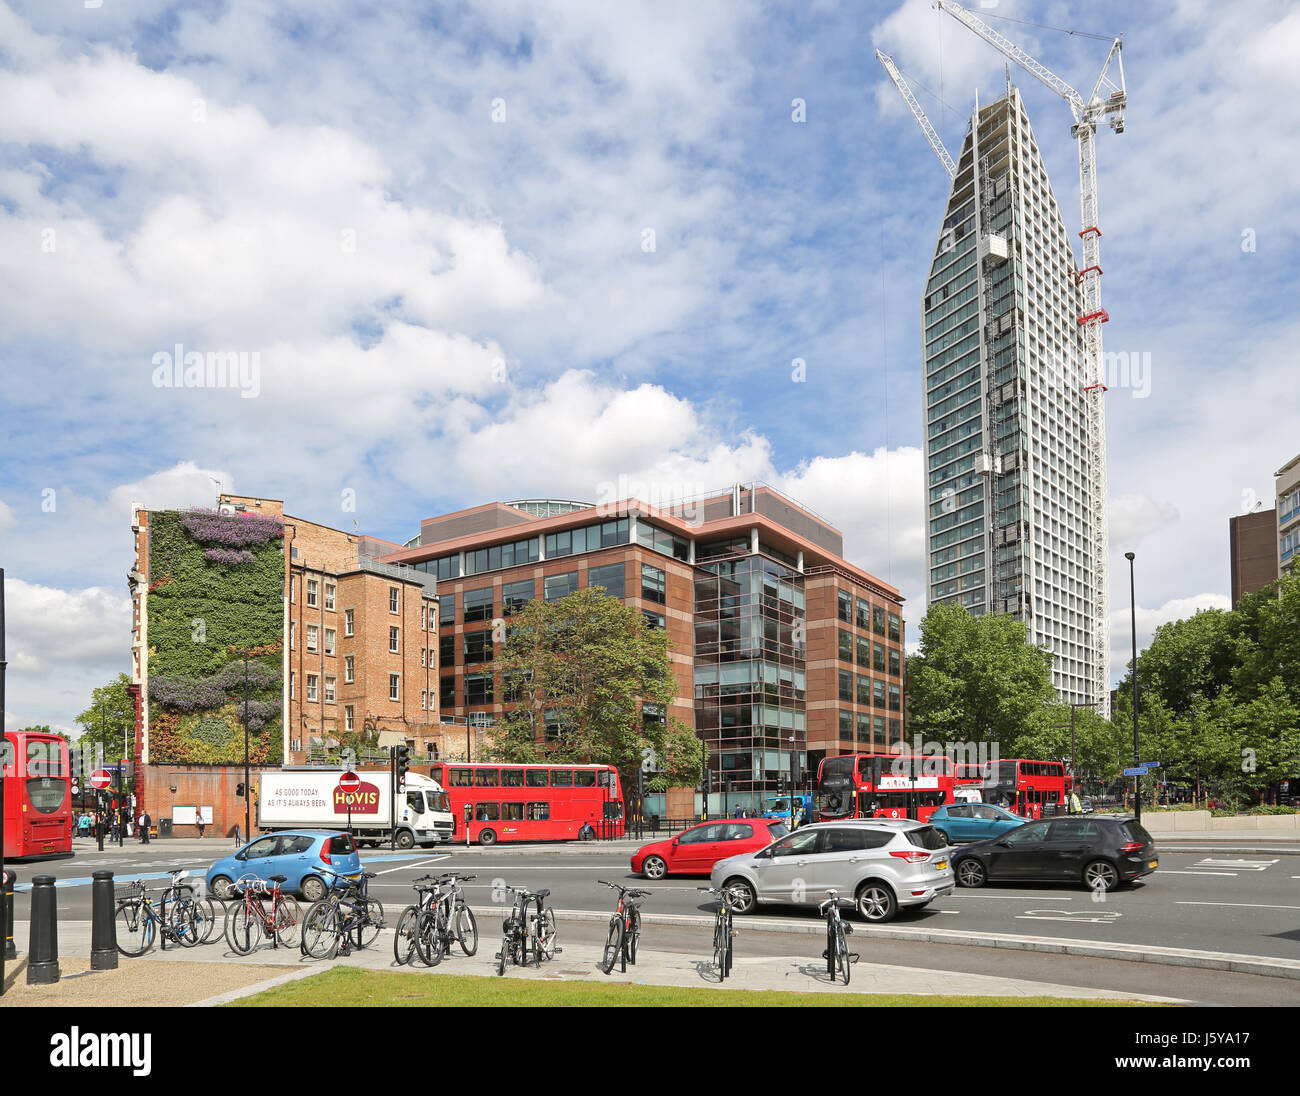 traffic flows round the newly remodelled road layout at London's Elephant and Castle junction. Shows new apartment block under construction beyond. Stock Photo